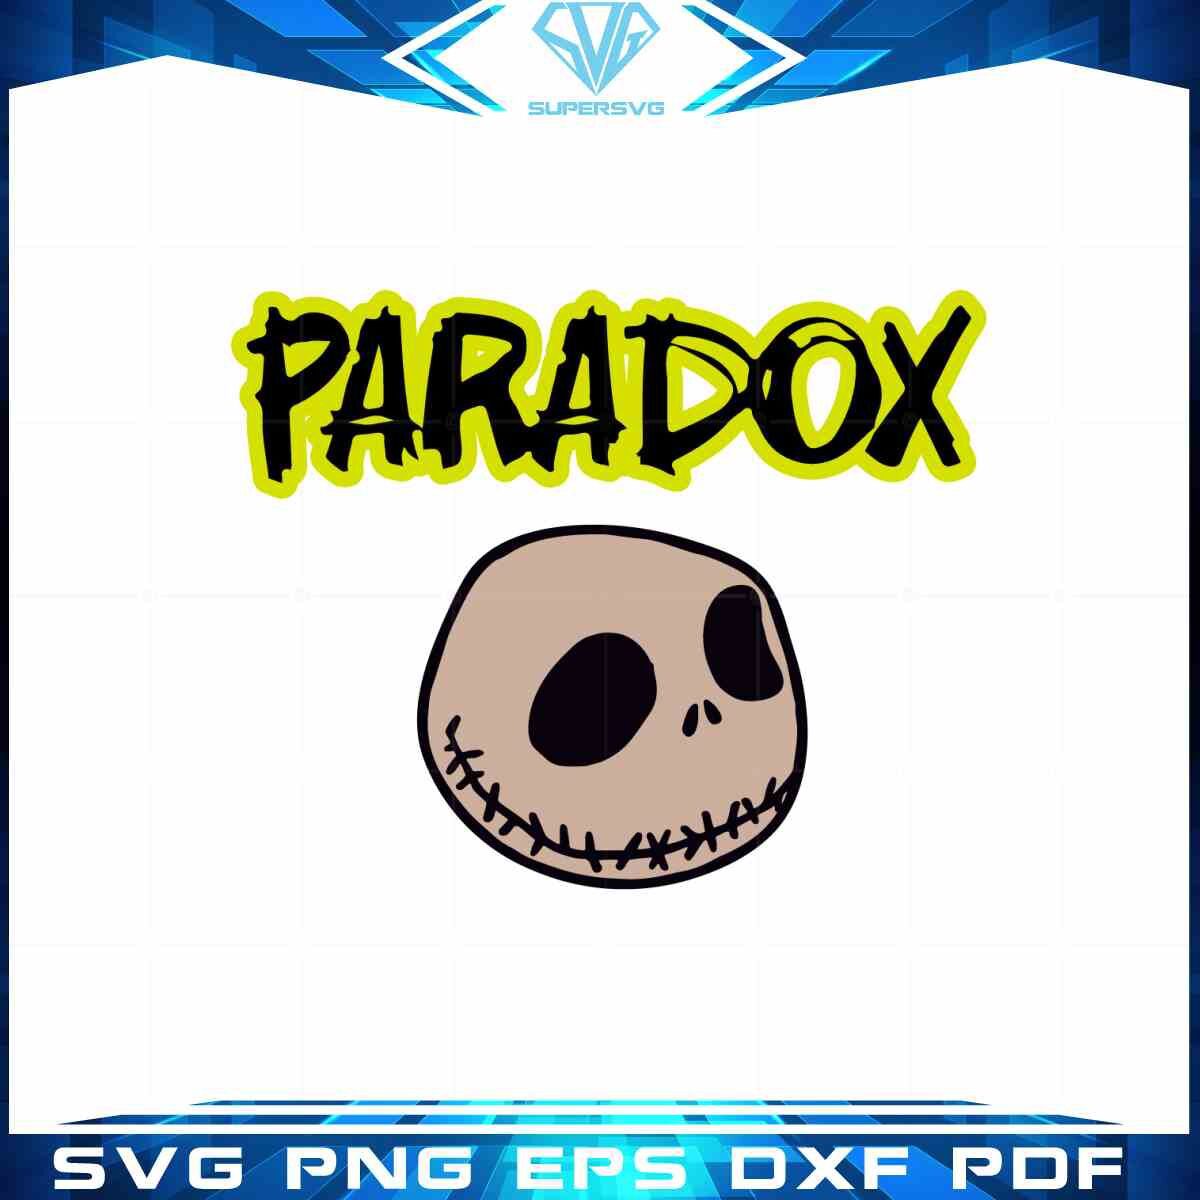 jack-skellington-and-sally-face-halloween-paradox-svg-cutting-files